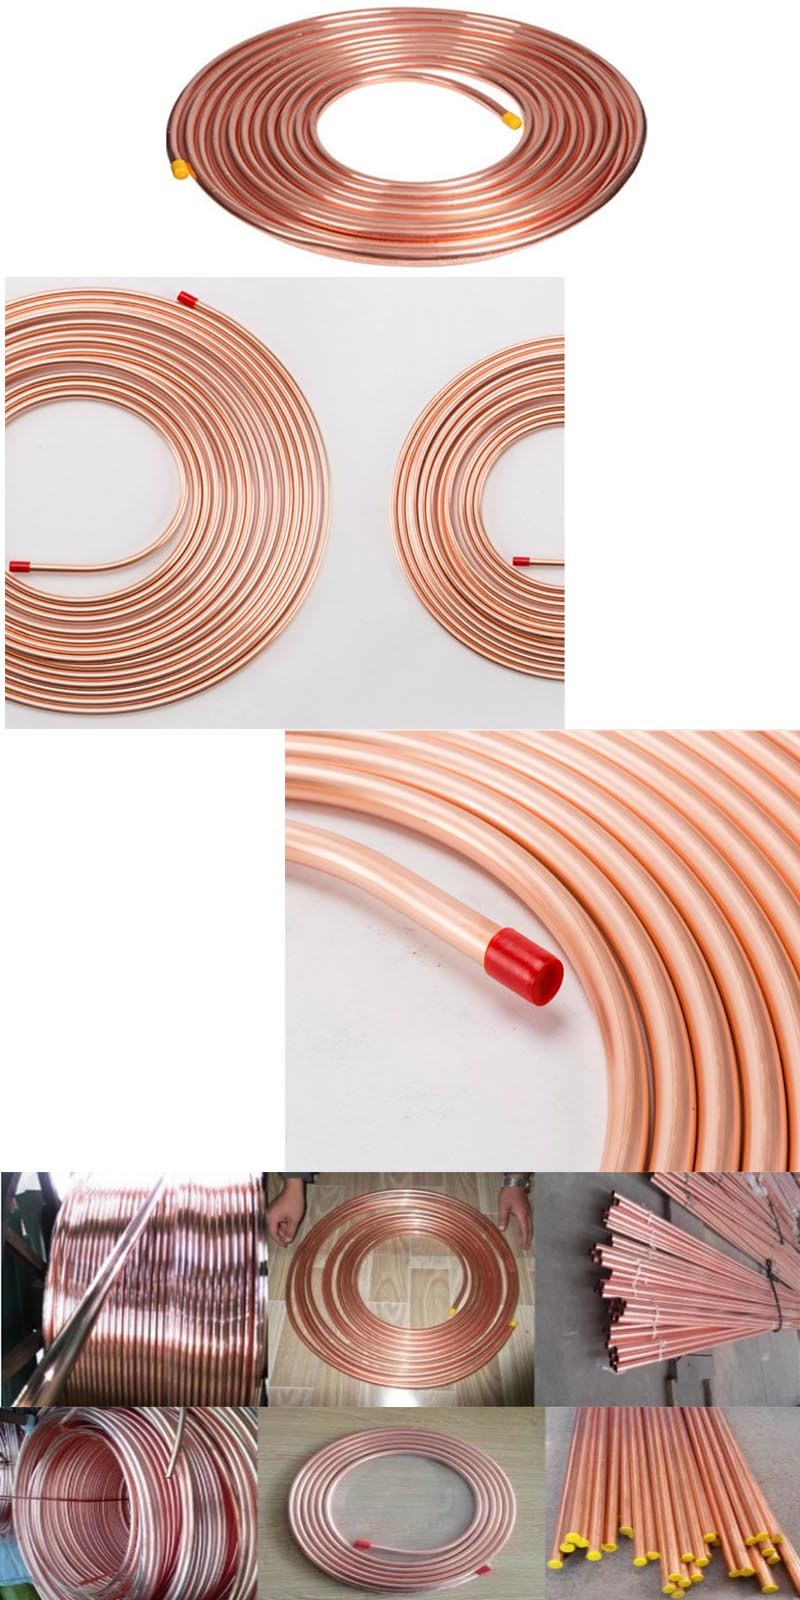 Supplier of Type K, Type L, Type M Straight Copper Pipe